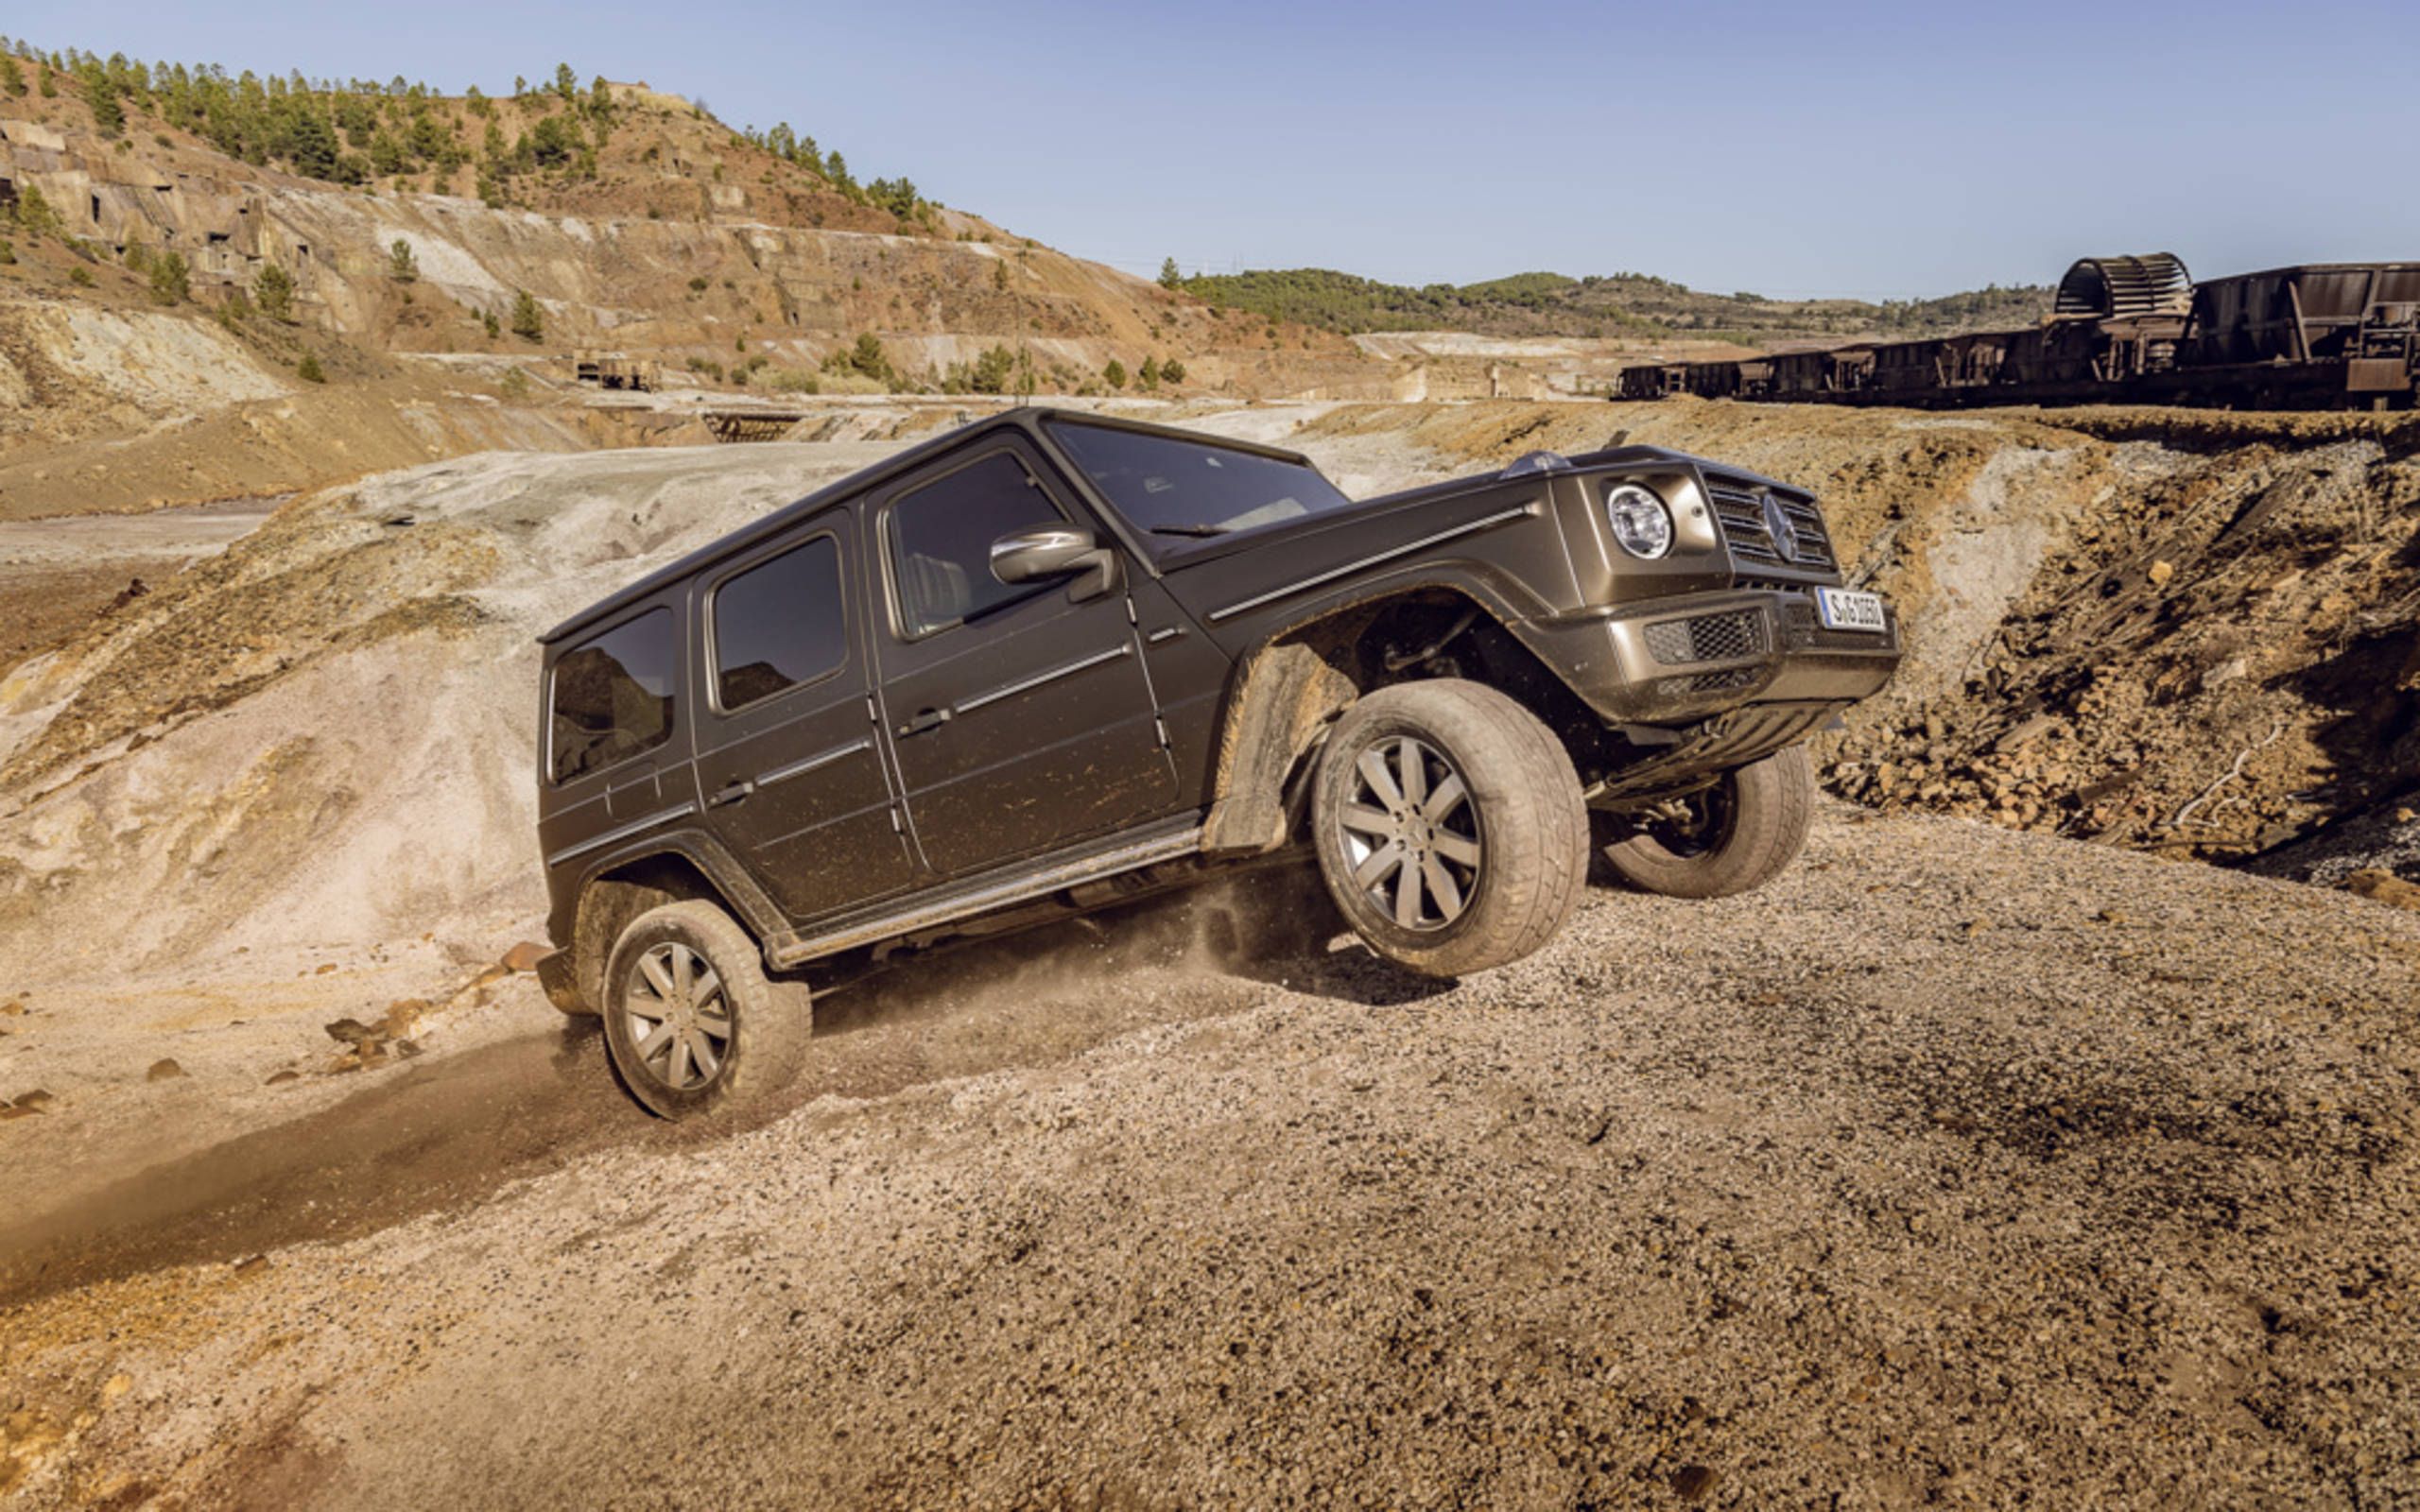 Mercedes-Benz G550 4x4 Squared review: Life exaggerated